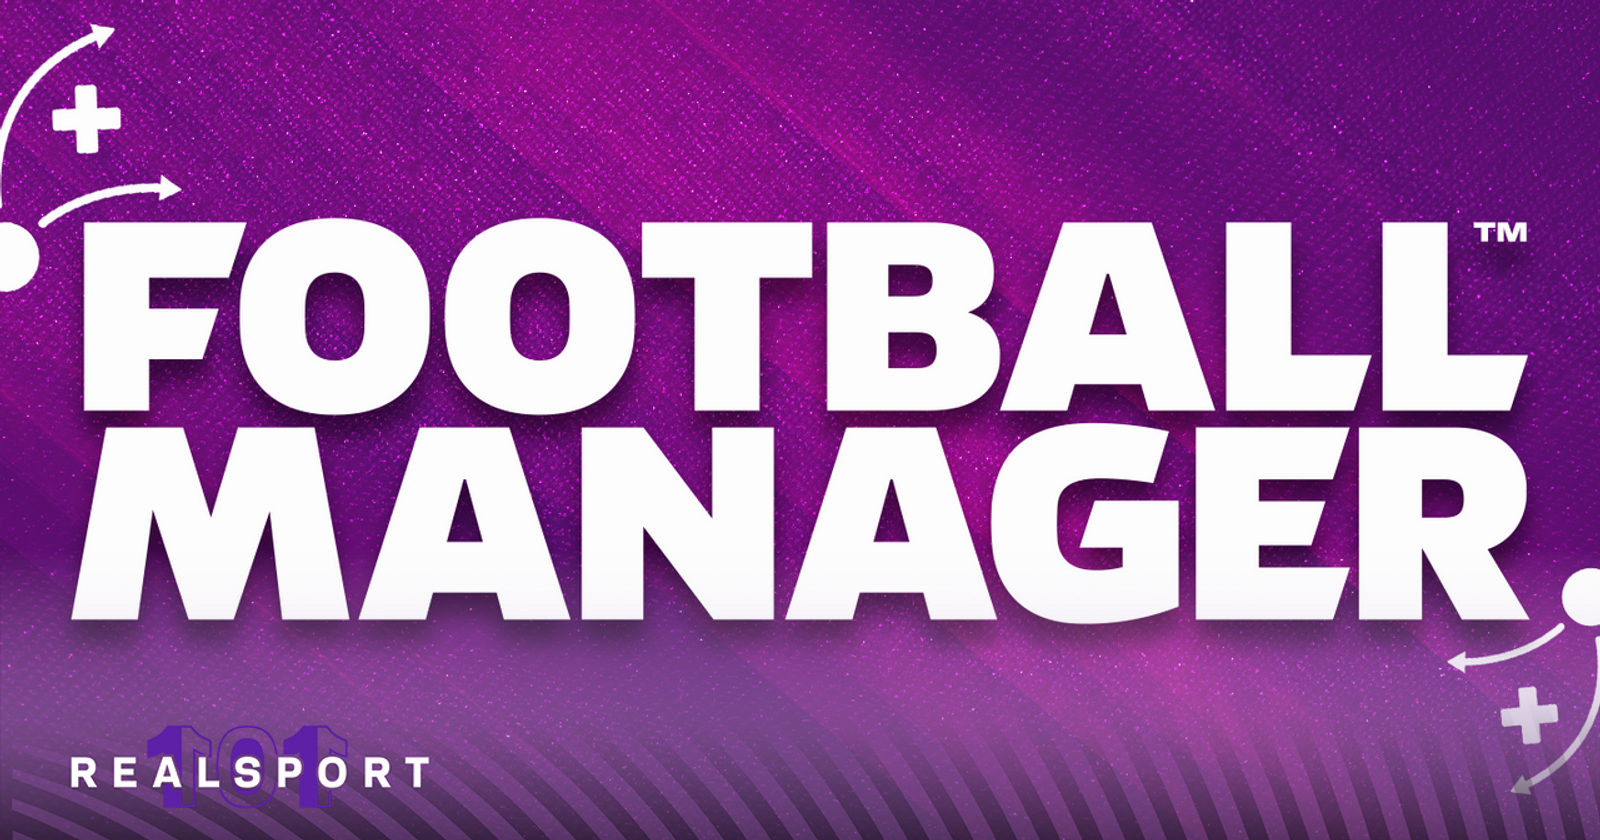 Football Manager 2022 Is Now Available For Digital Pre-order And